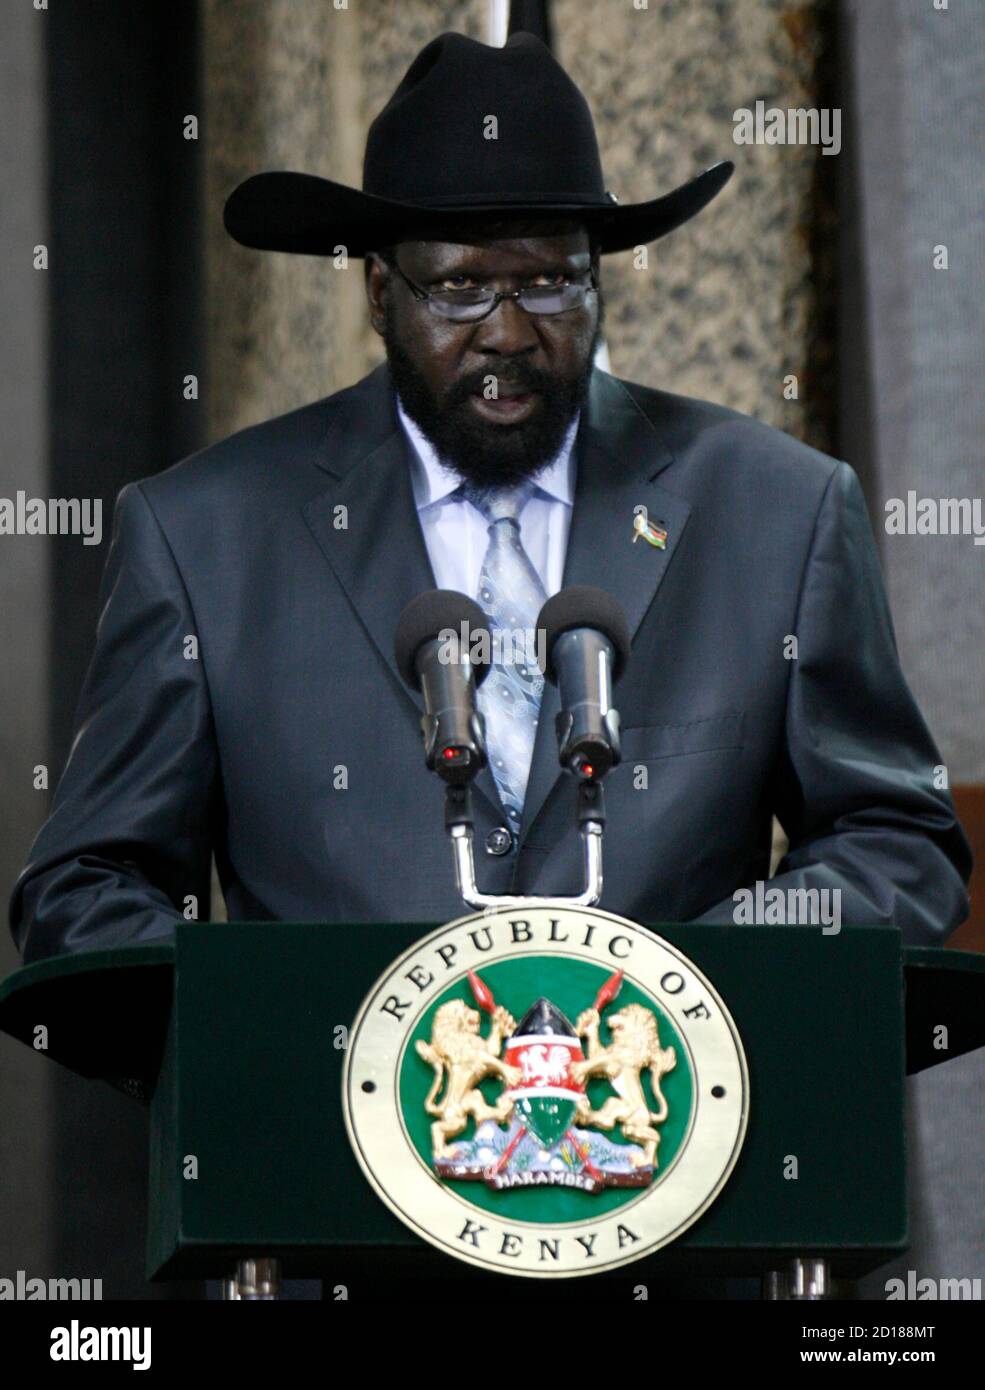 Sudan's First Vice President Salva Kiir addresses the 14th extra-ordinary summit of Intergovernmental Authority on Development (IGAD) Assembly of Heads of State and Governments on the Sudan Peace Process in Kenya's capital Nairobi, March 9, 2010. REUTERS/Thomas Mukoya (KENYA - Tags: POLITICS CIVIL UNREST) Stock Photo